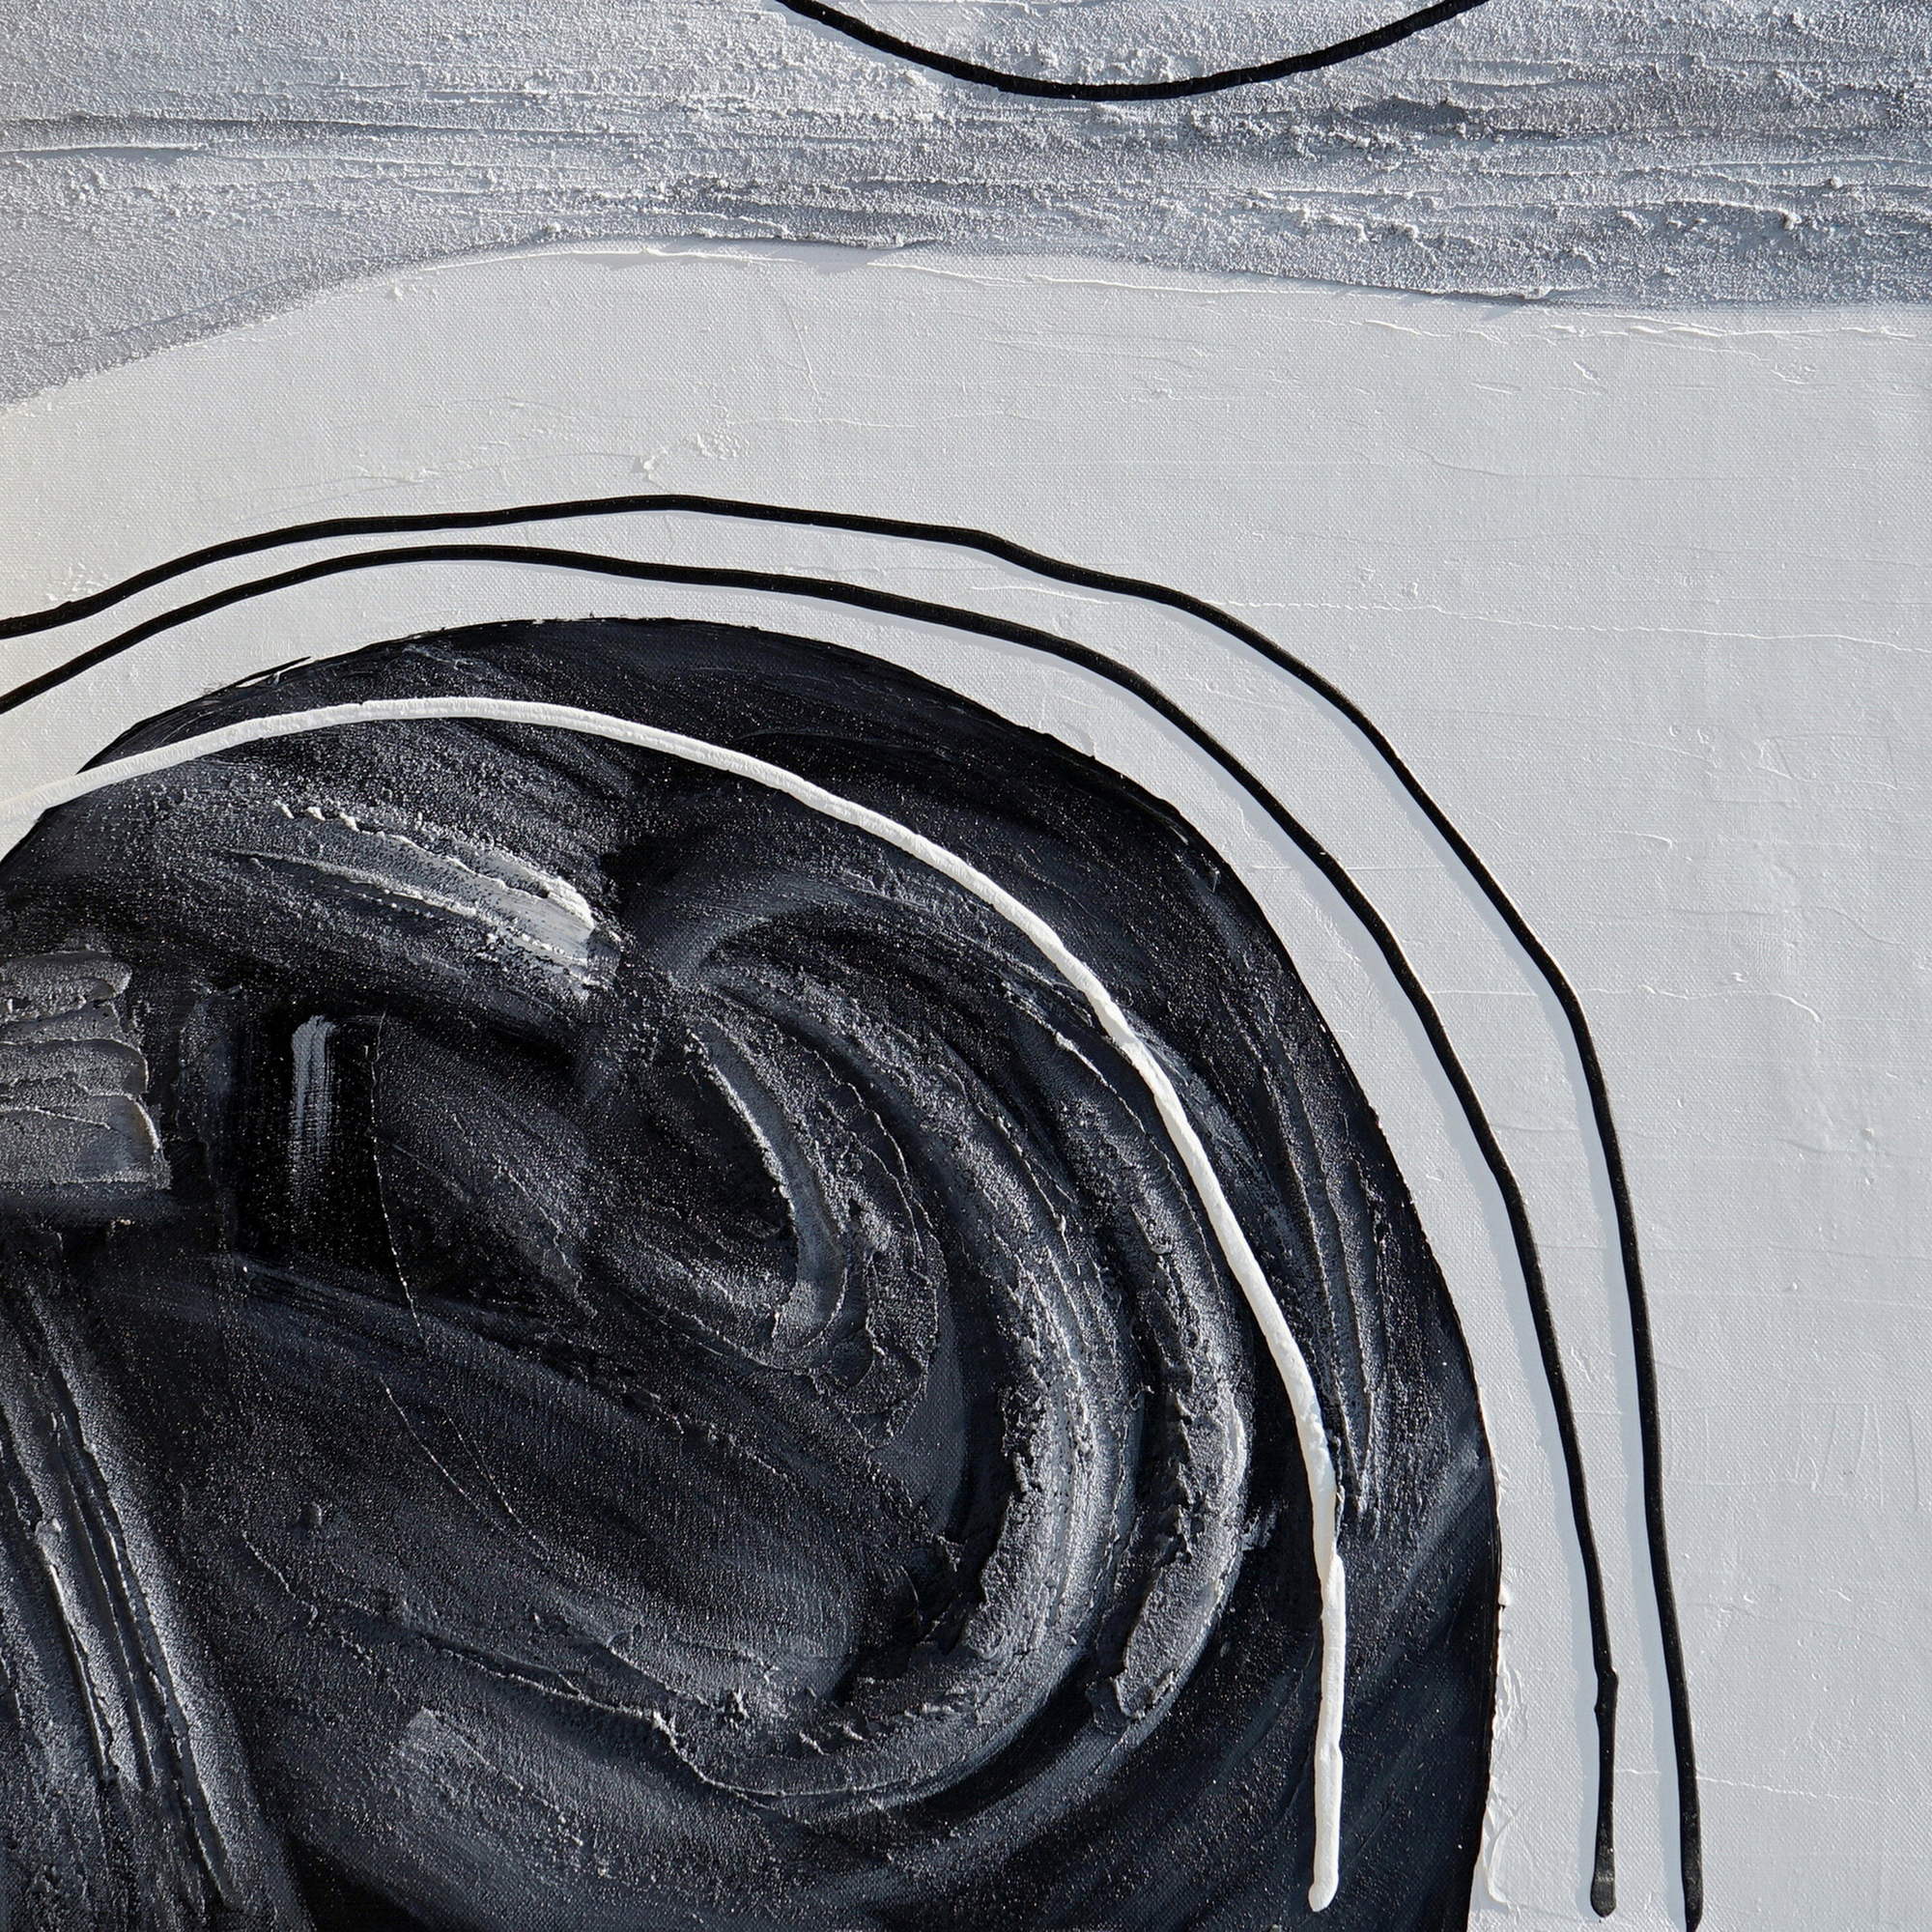 Hand painted Abstract Black and White 75x100cm